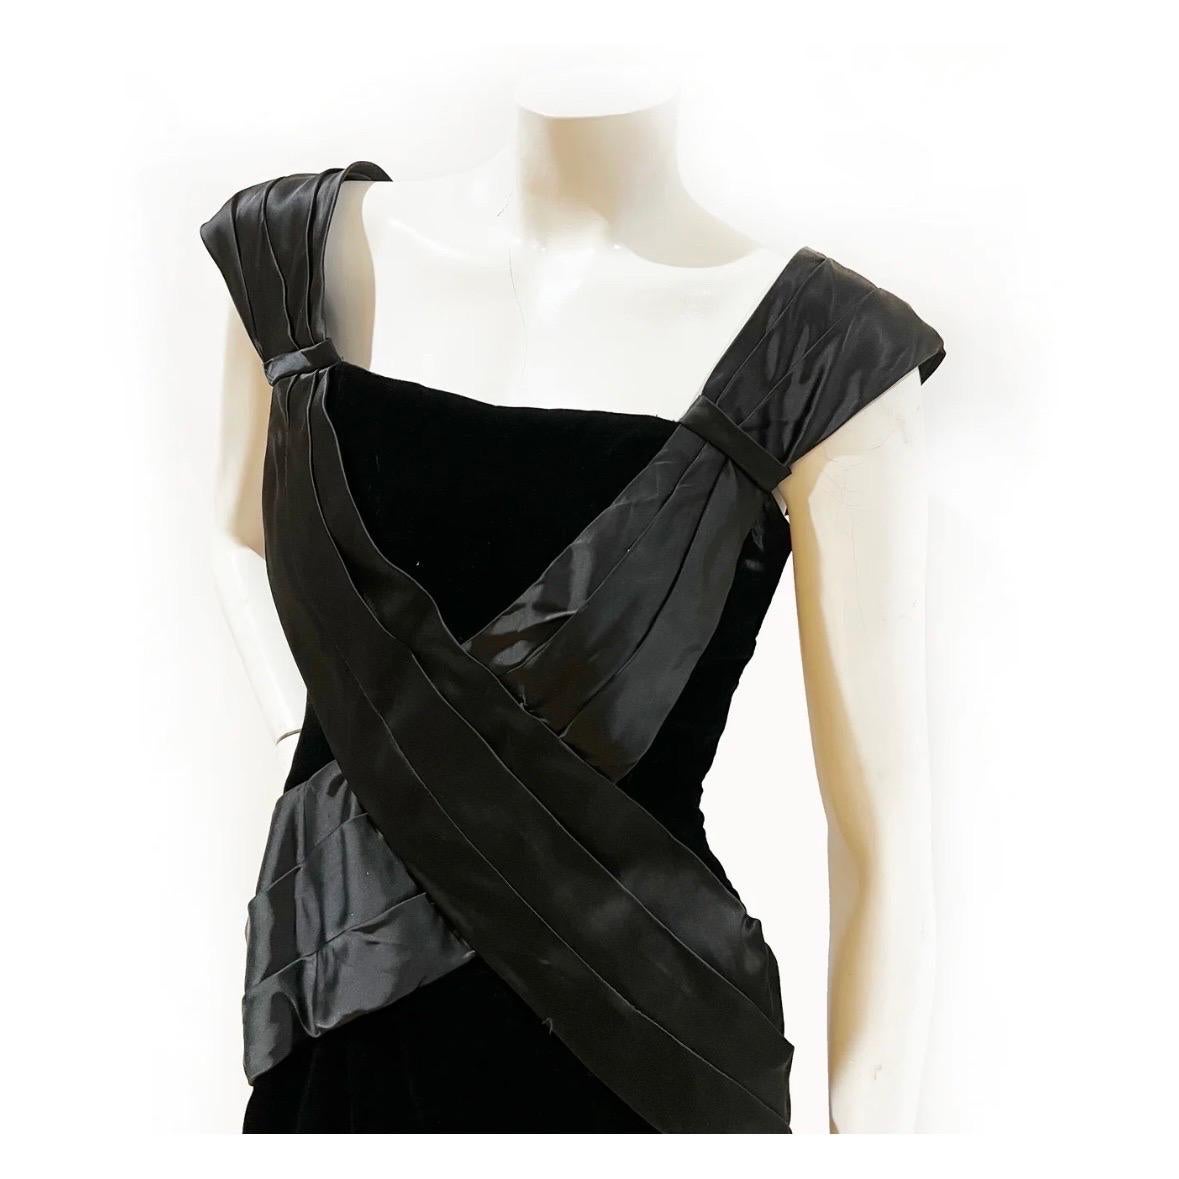 Vintage black velvet dress by Victor Costa for Saks Fifth Avenue 
1980's
Made in USA
Black velvet shell 
Black layered (semi-padded) satin straps that cross through bodice 
Decorative satin continues to back and leads to a decorative, structured